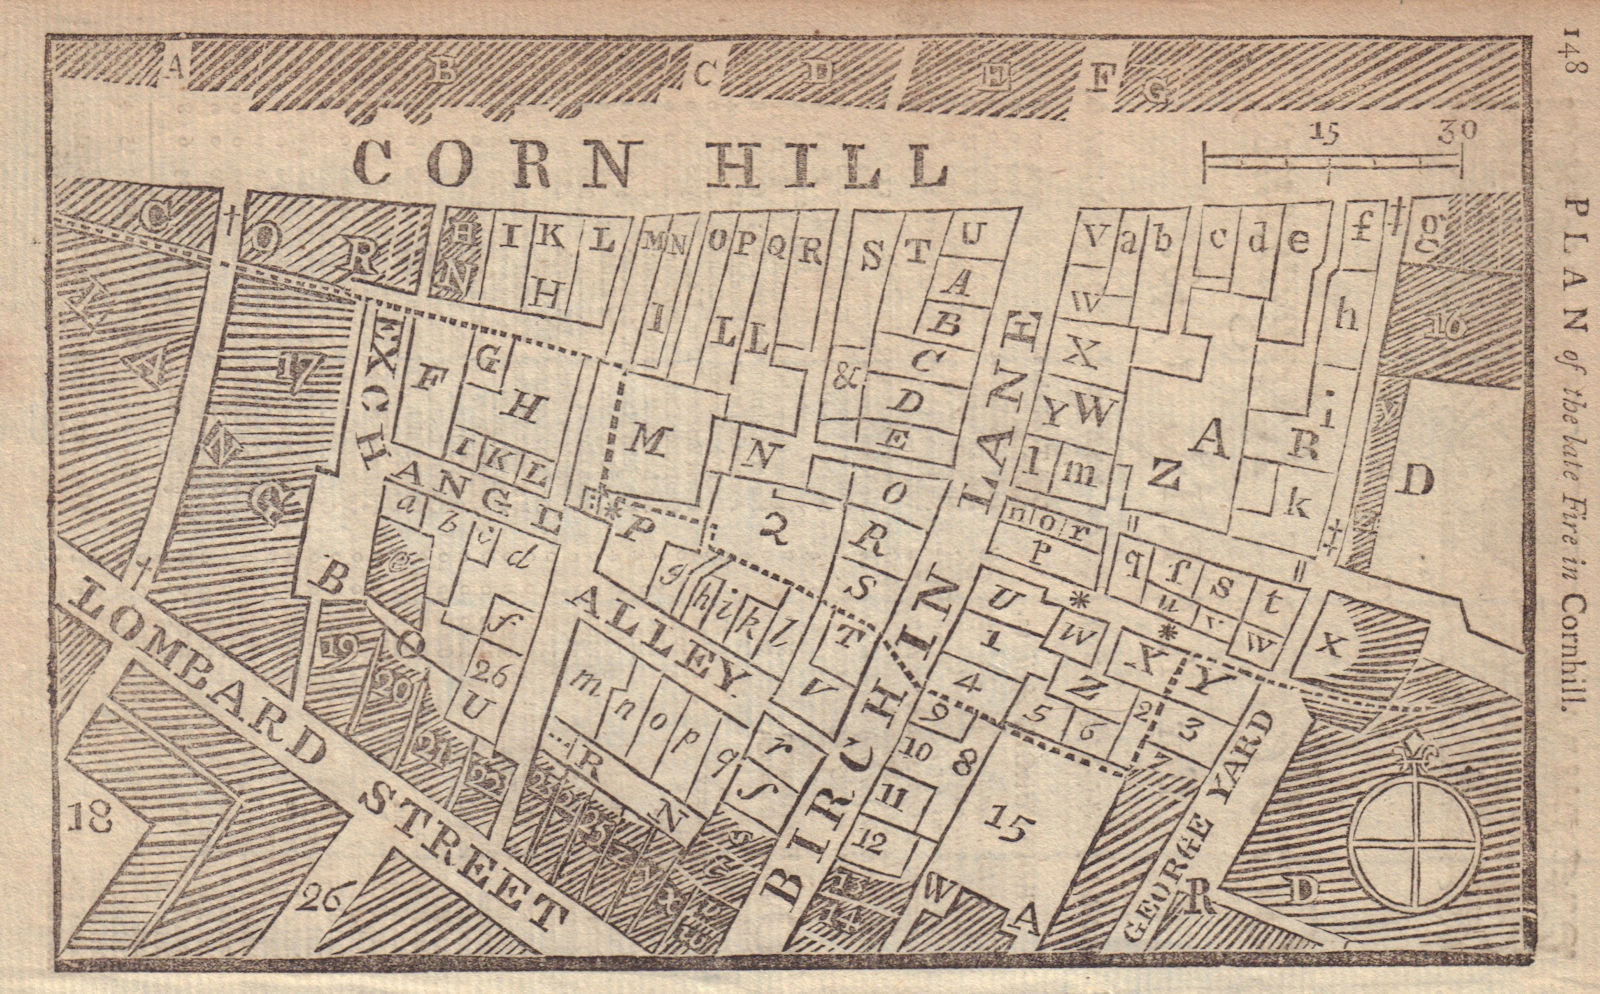 The 1748 fire in Exchange Alley, Cornhill, City of London. GENTS MAG 1748 map